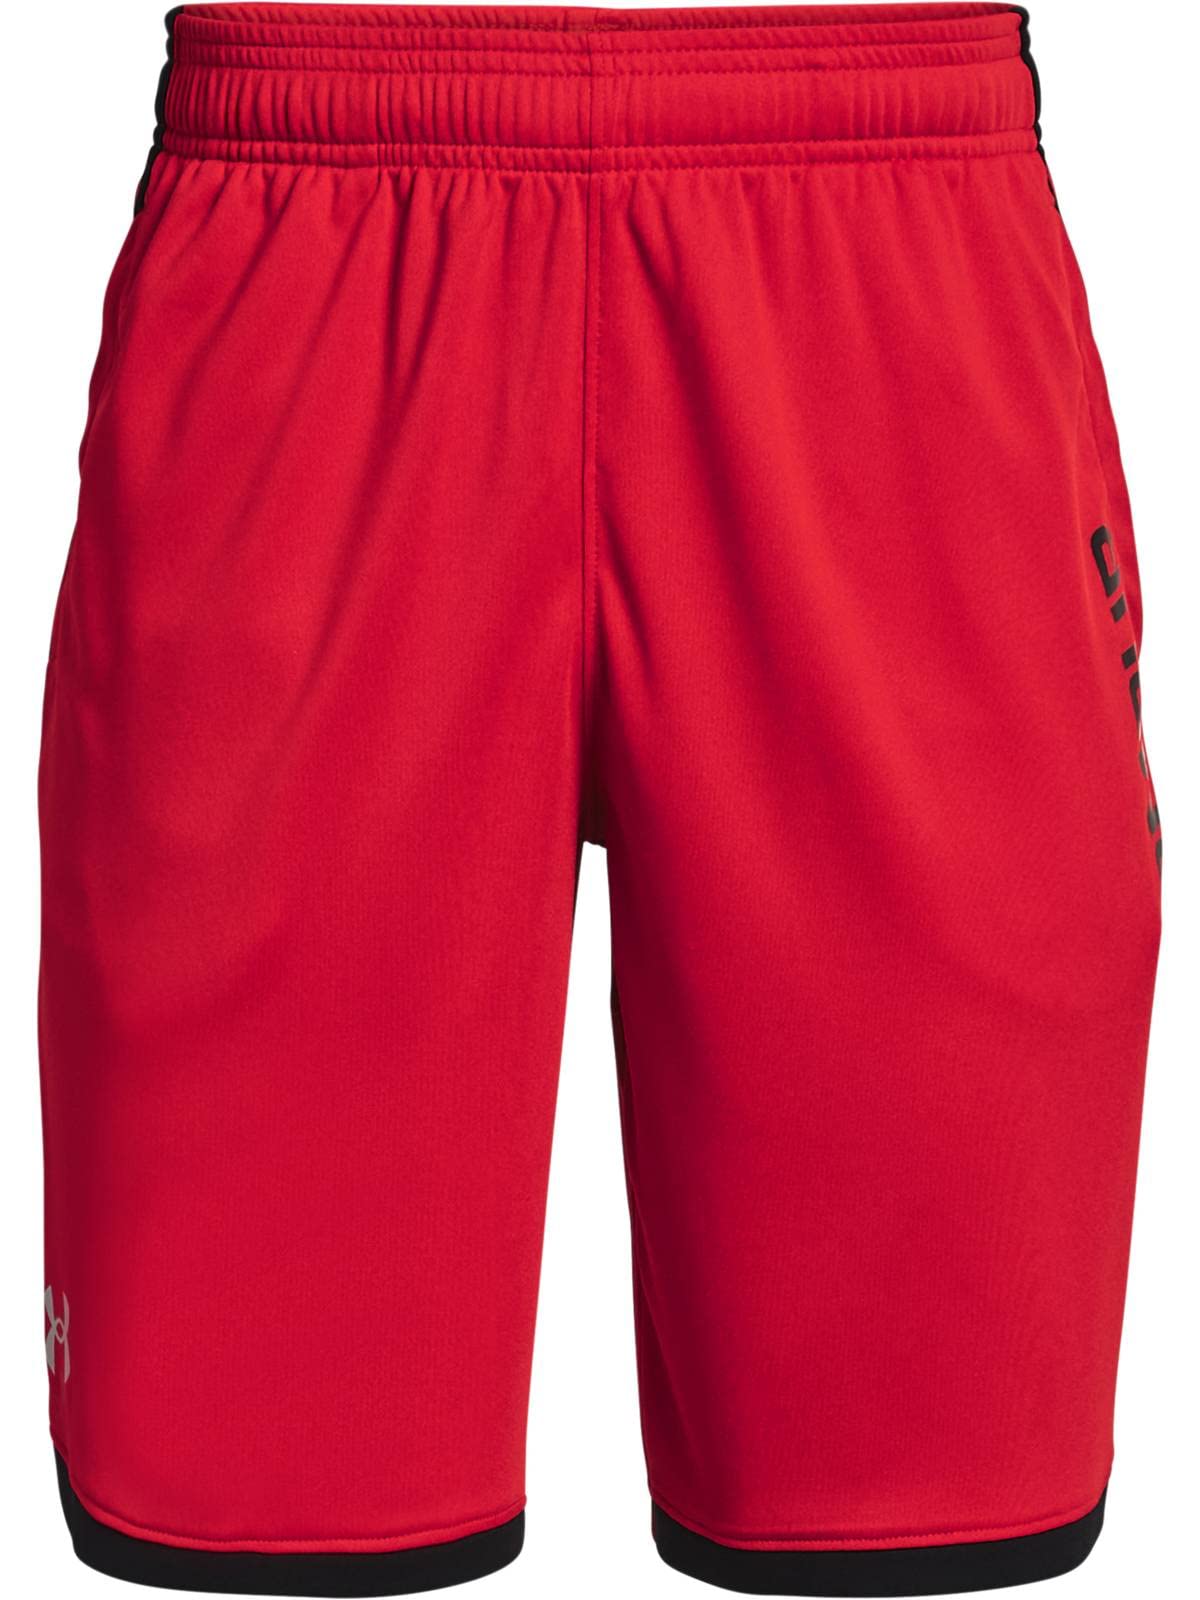 Under Armour Boys' Stunt 3.0 Shorts , Red (600)/Mod Gray , Youth X-Small